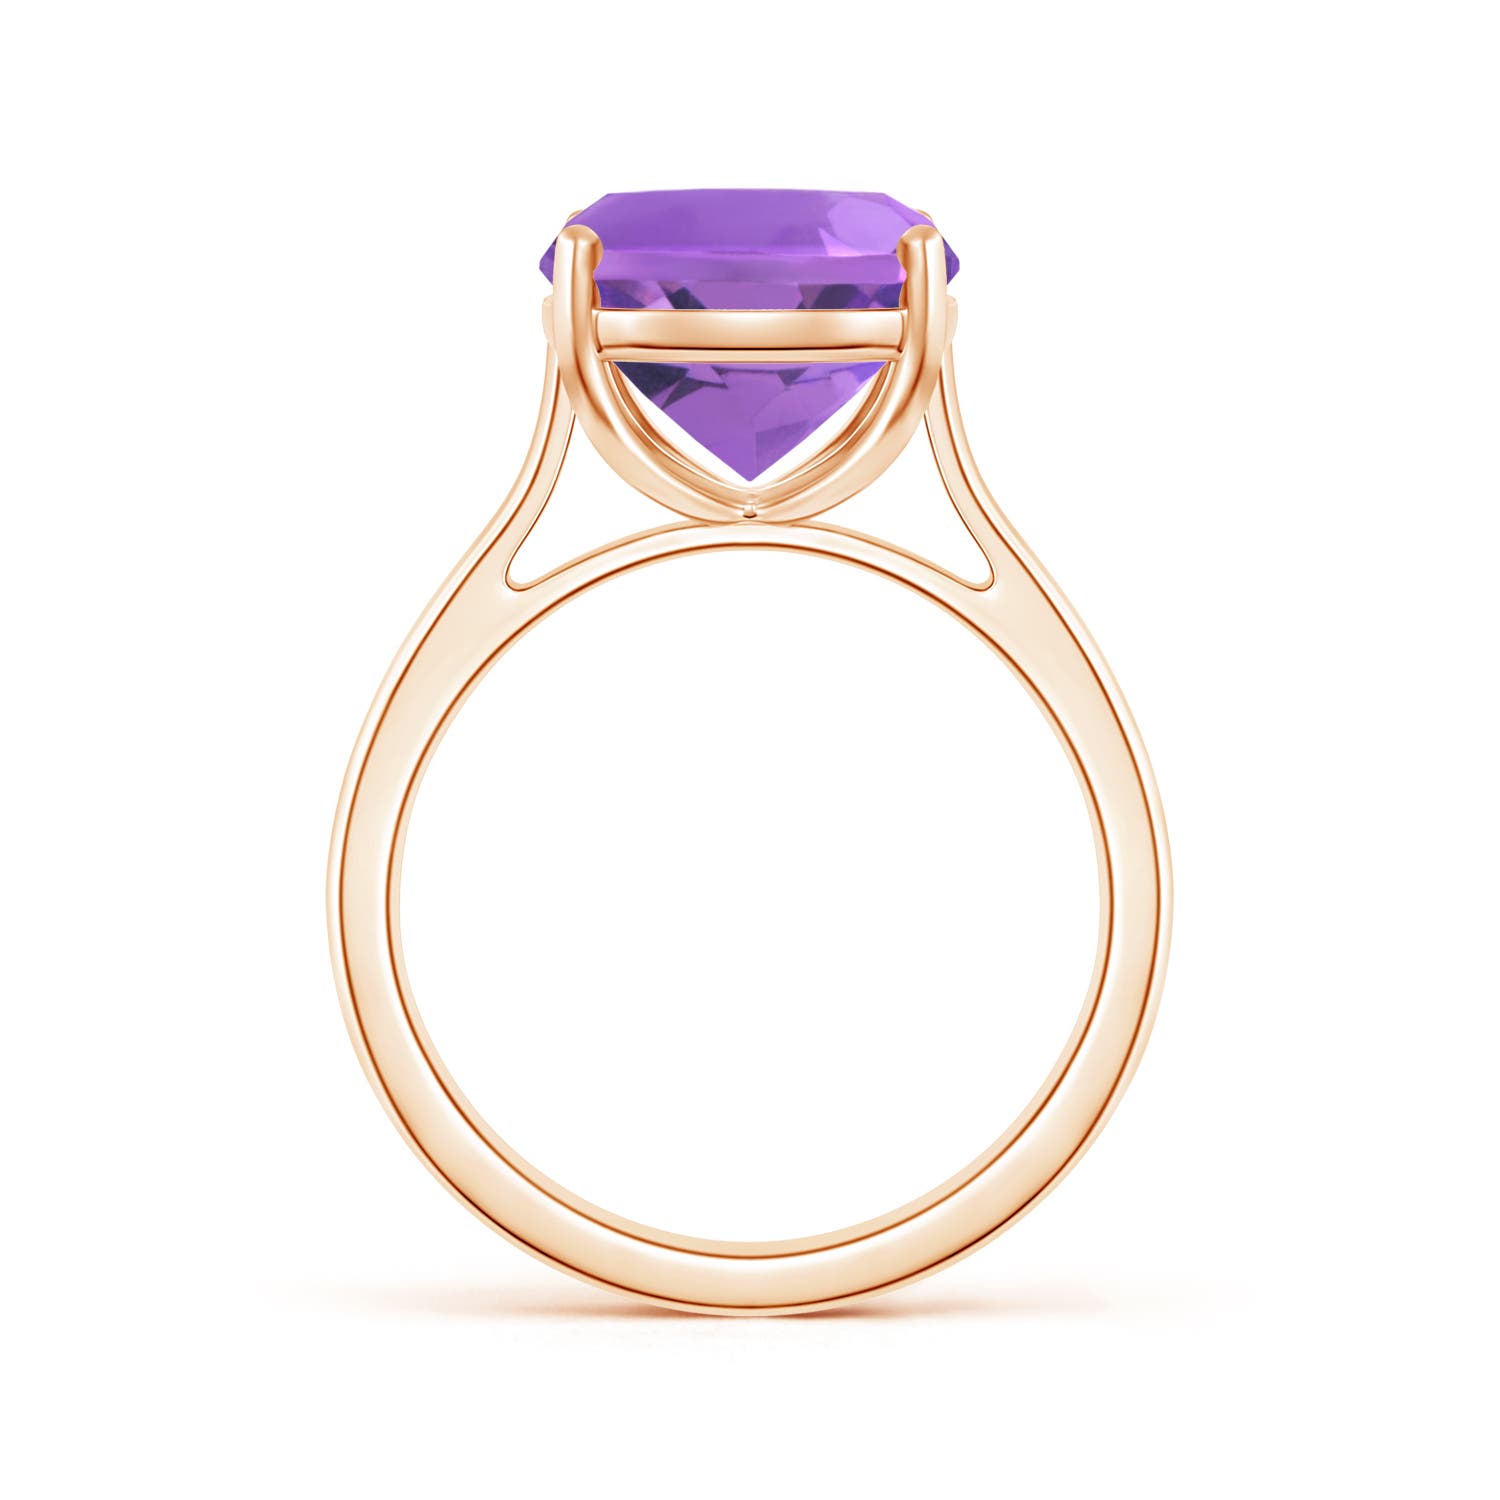 AA - Amethyst / 4.64 CT / 14 KT Rose Gold